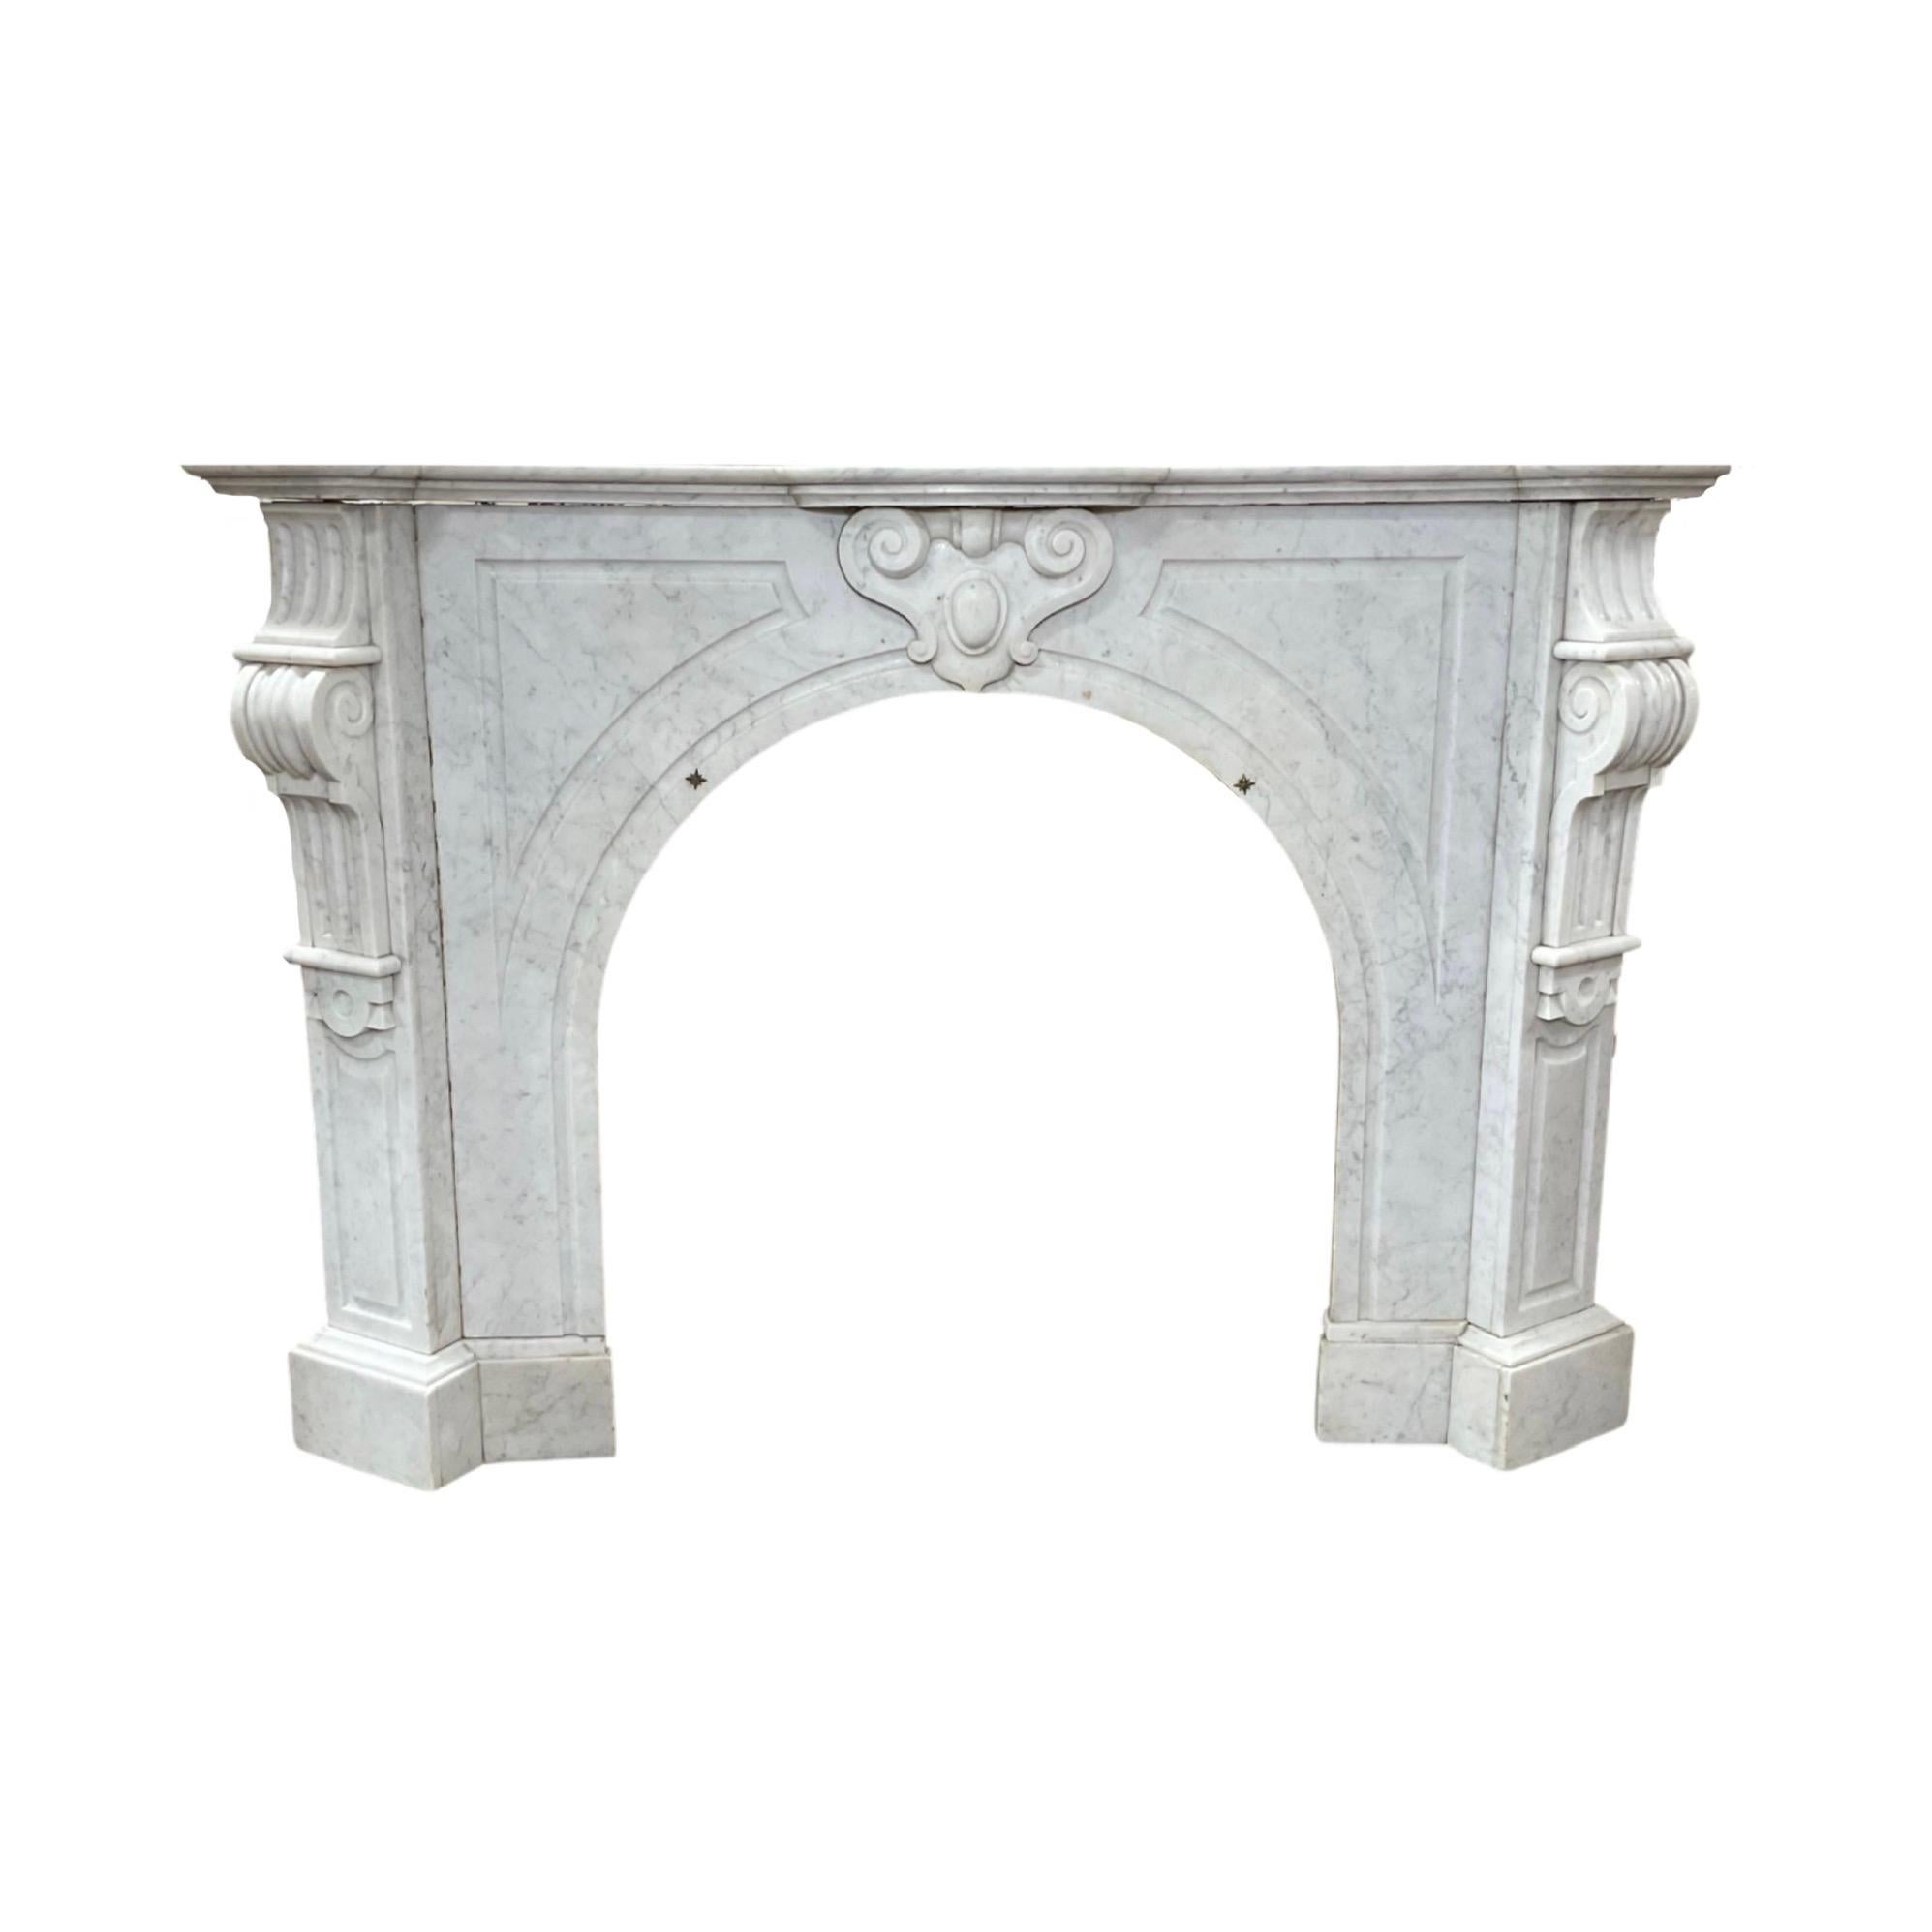 This classic French marble mantel from circa 1880 boasts a beautiful louis xvi style craftsmanship and is made with a luxurious white Carrara marble. Its timeless style will bring a touch of elegance to any space.